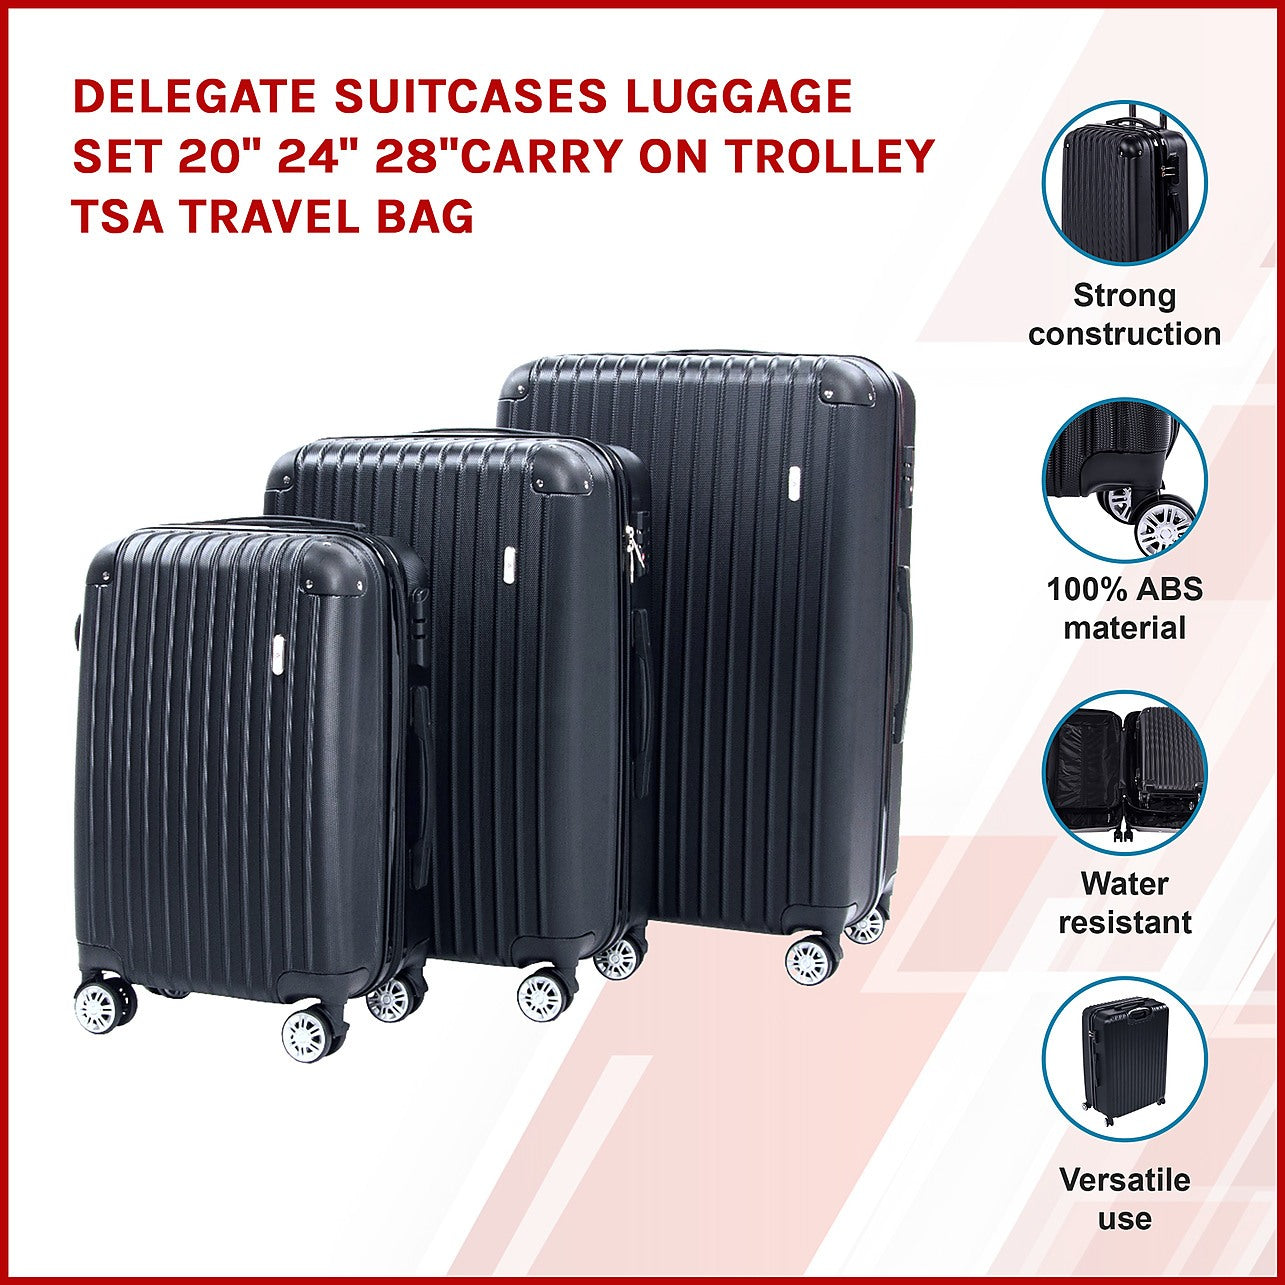 Delegate Suitcases Luggage Set 20 24 28Carry On Trolley TSA Travel Bag -  Home & Lifestyle > Travel Goods